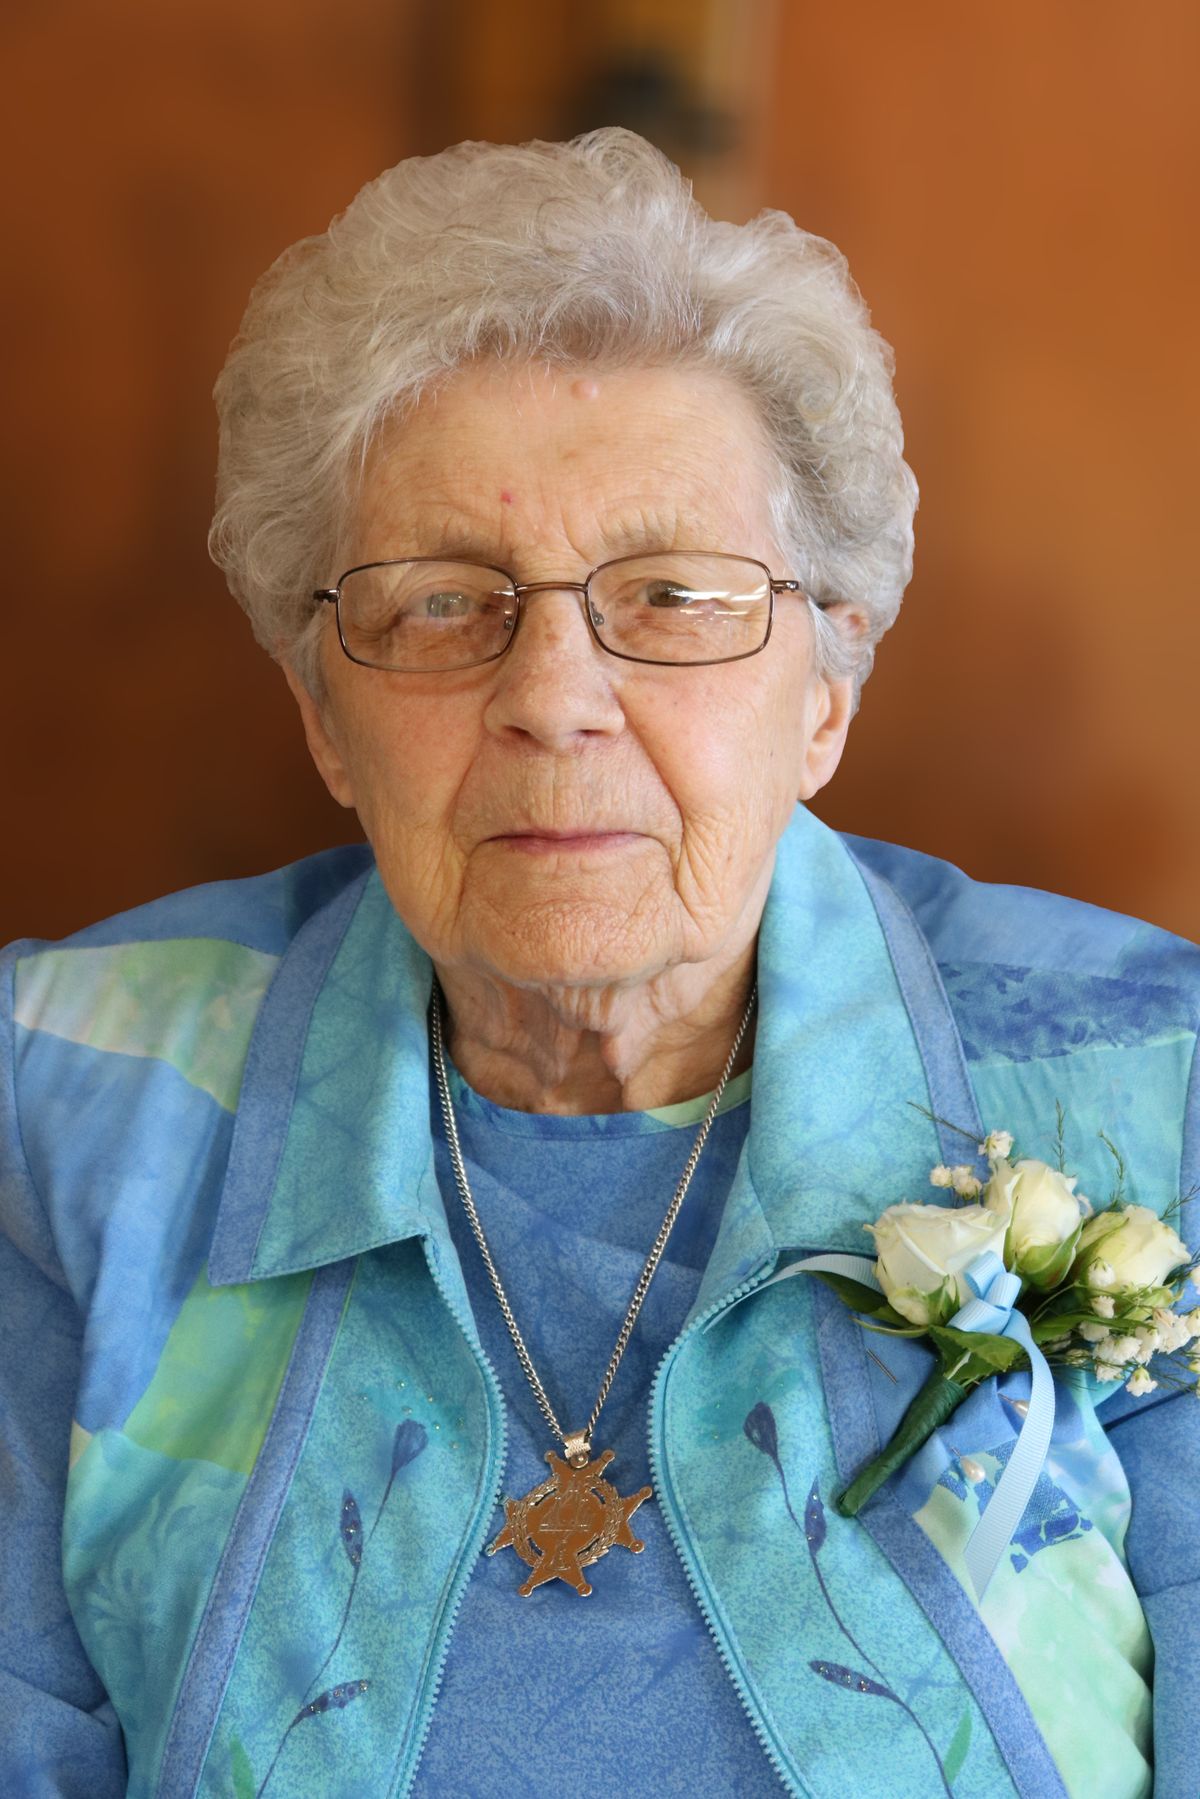 Sister Donna Storms has marked 70 years of religious life with the Franciscan Sister of Perpetual Adoration. A formal diamond jubilee celebration took place May 5 at Villa St. Joseph in La Crosse, Wis.  (Courtesy)